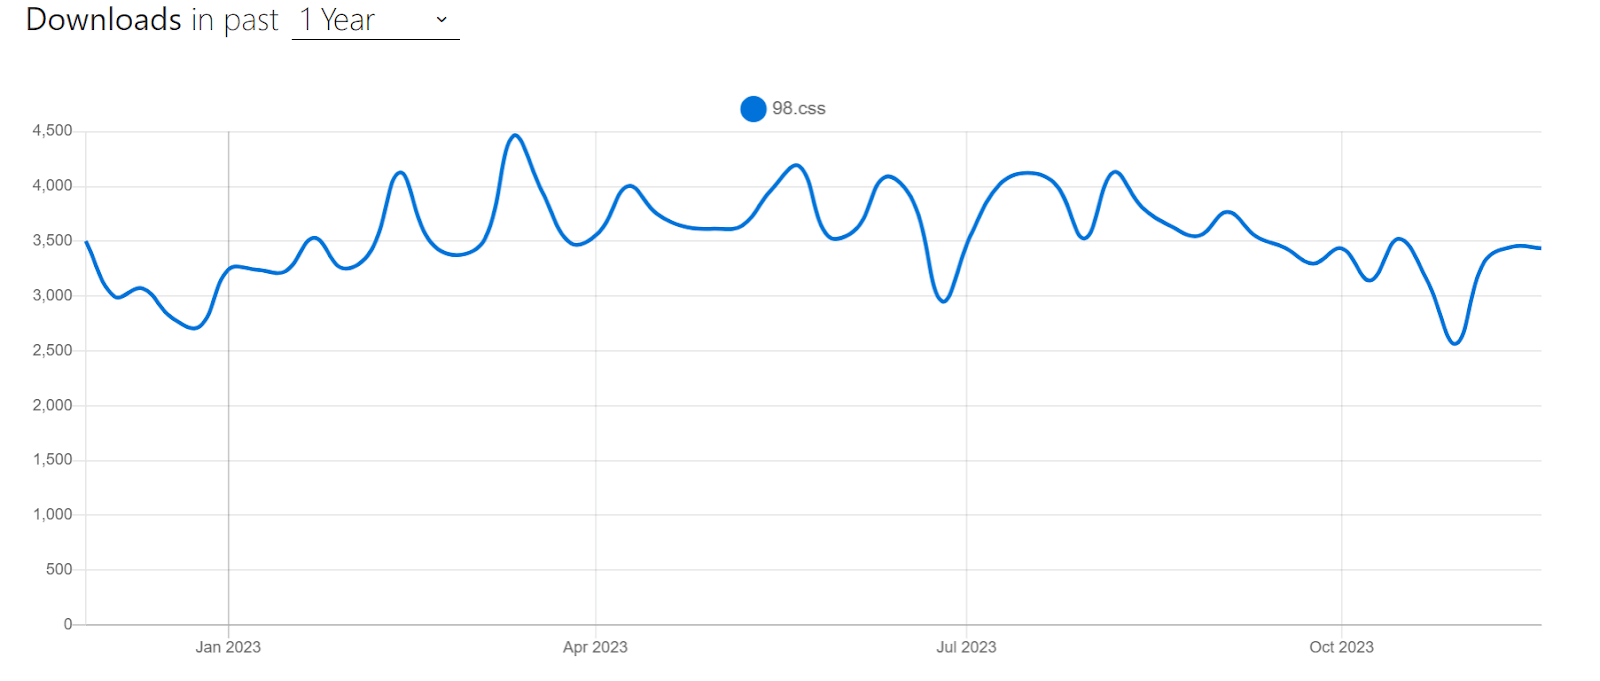 98css weekly downloads according to npm trends.